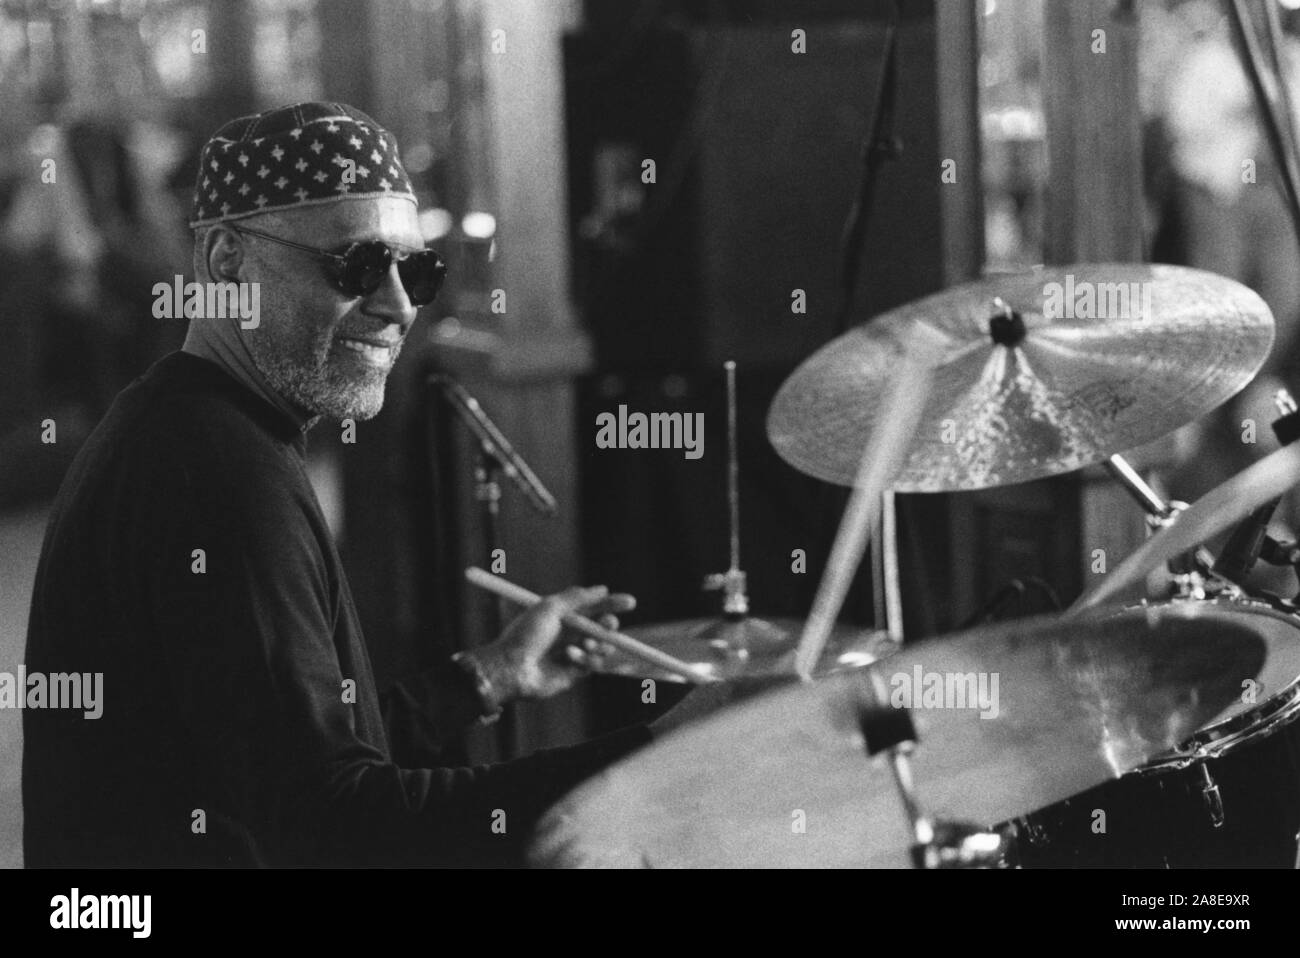 People Drumming Black and White Stock Photos & Images - Alamy